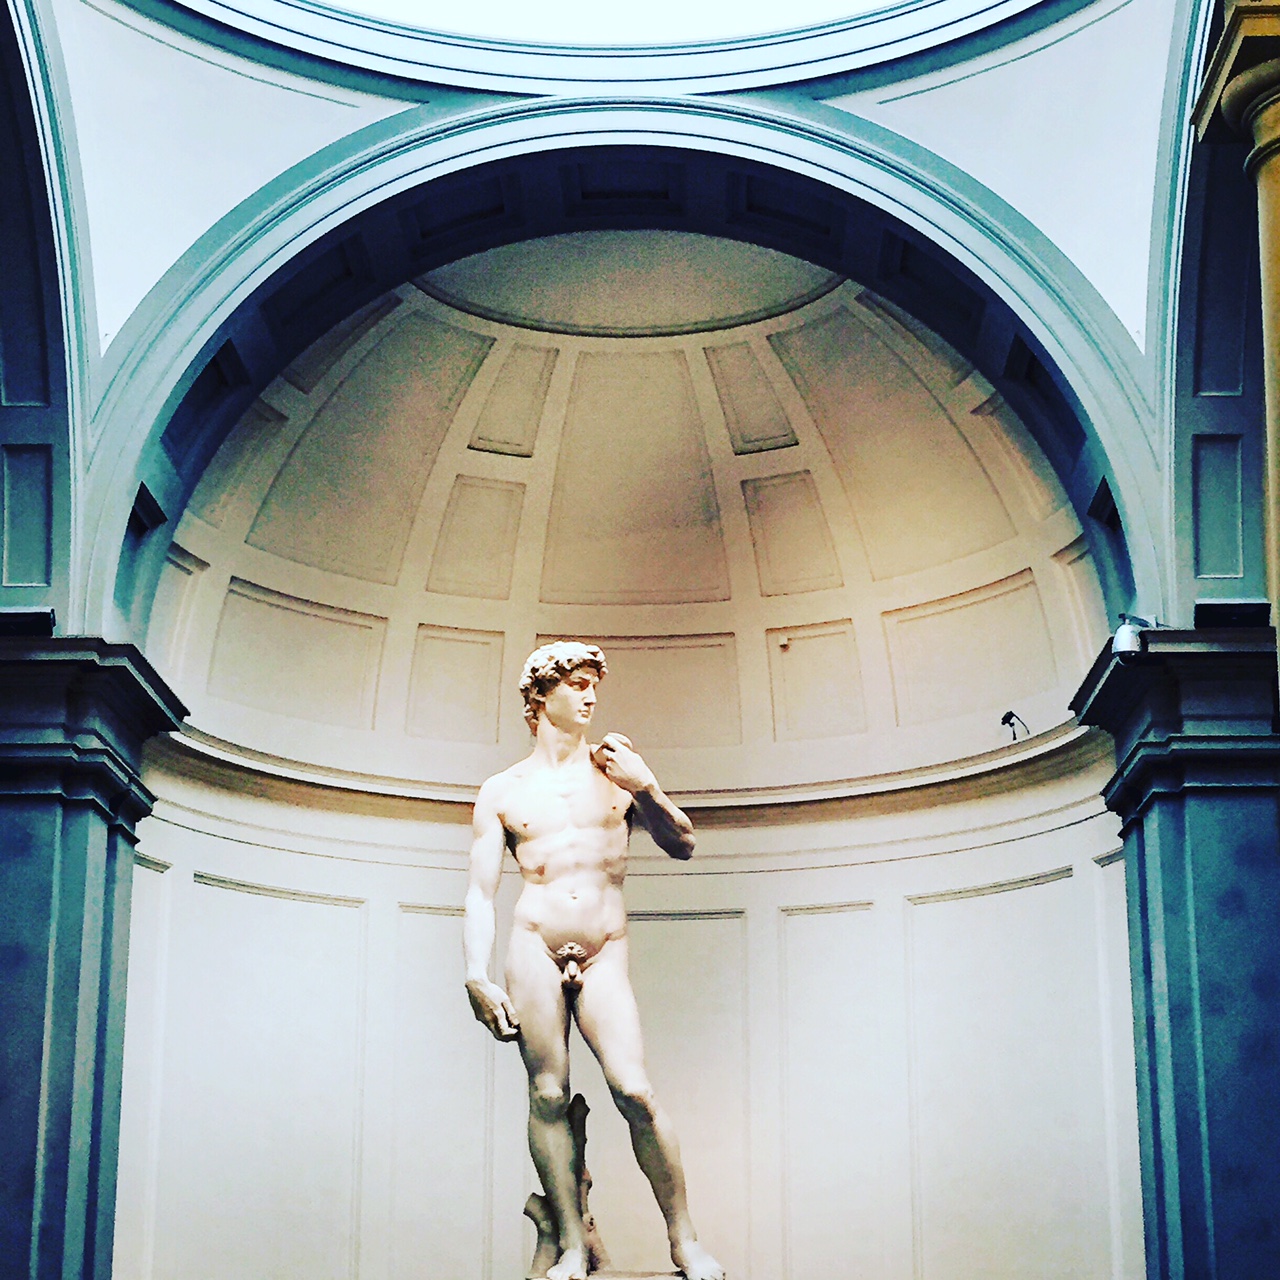 Alone time with the David? Maybe now's your chance with the new evening opening hours at the Accademia. Ph. ©2016 Helen Farrell / The Florentine